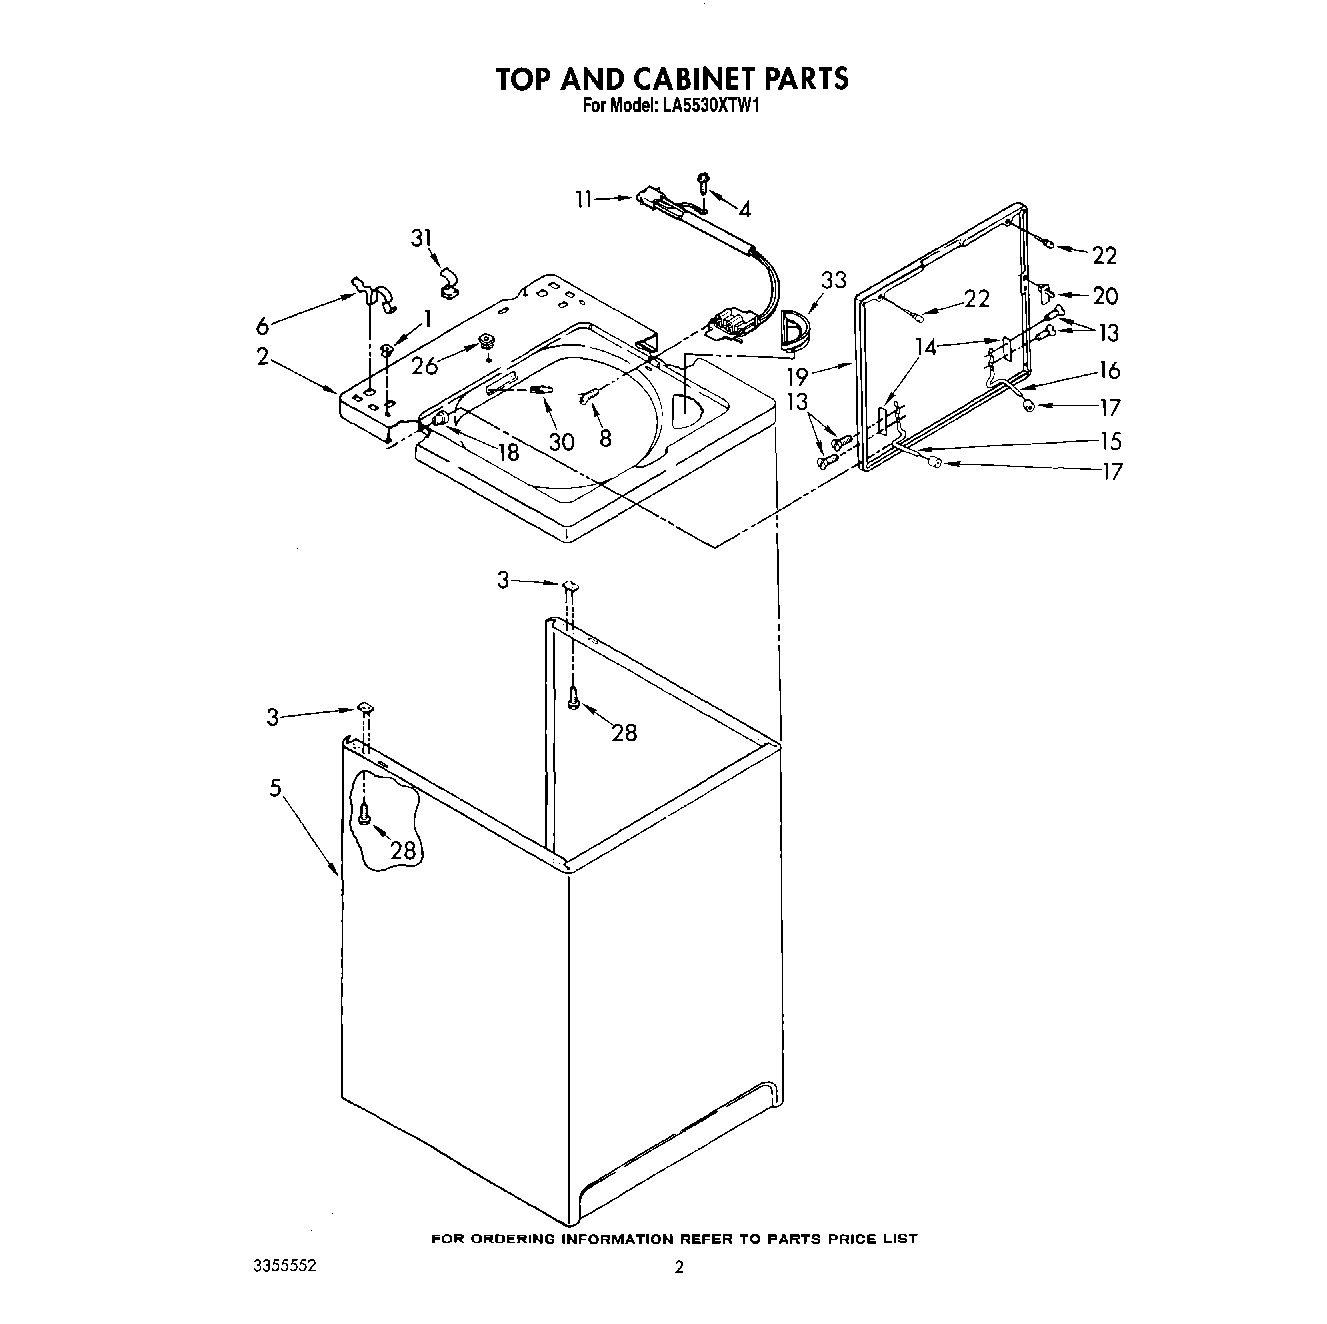 02 - TOP AND CABINET, LIT/OPTIONAL